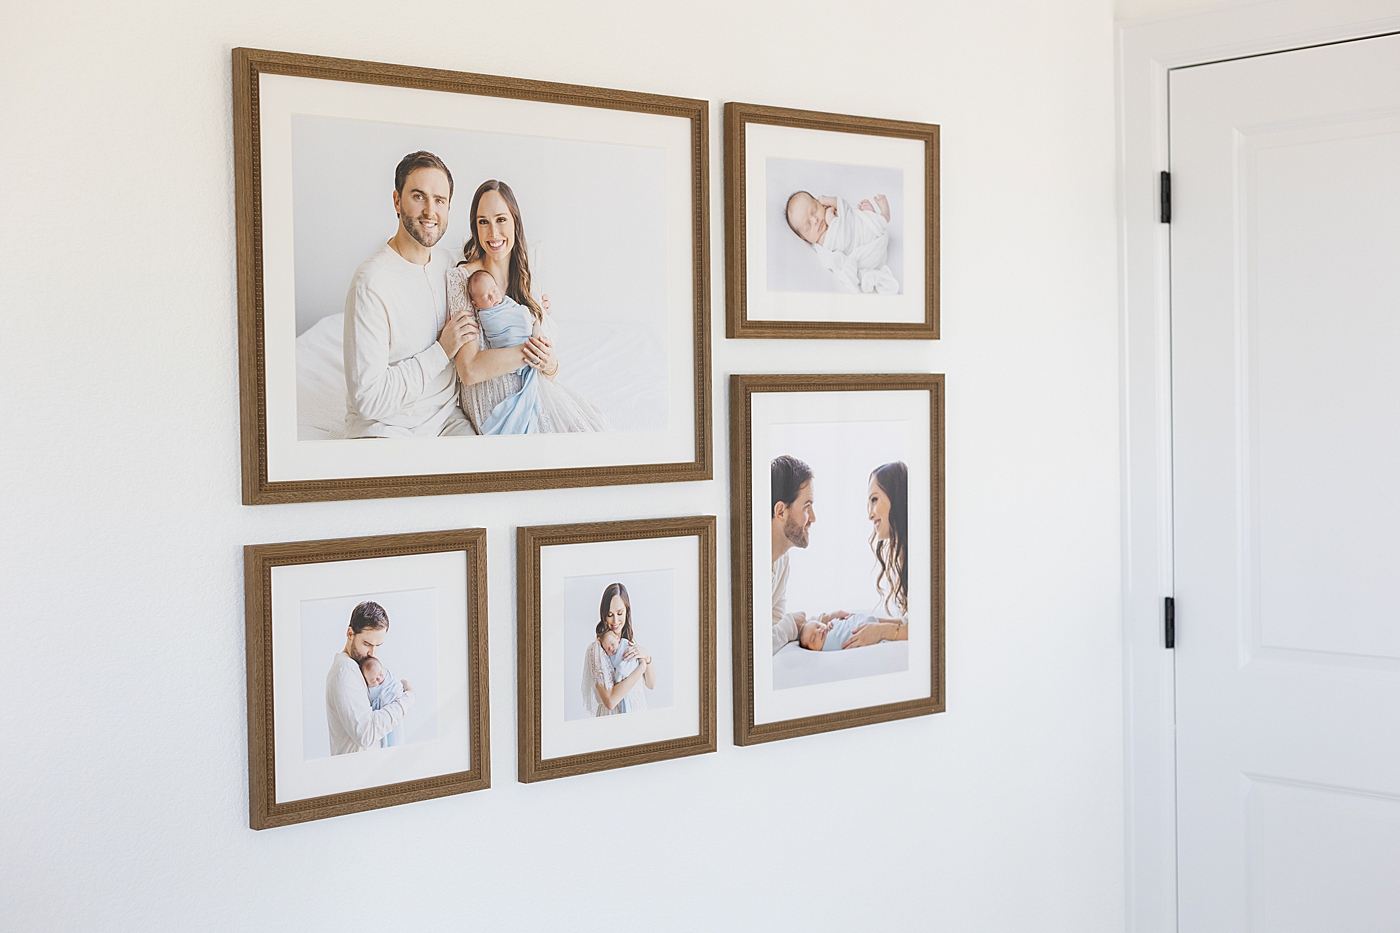 Gallery wall in clients home | Image by Sana Ahmed Photography